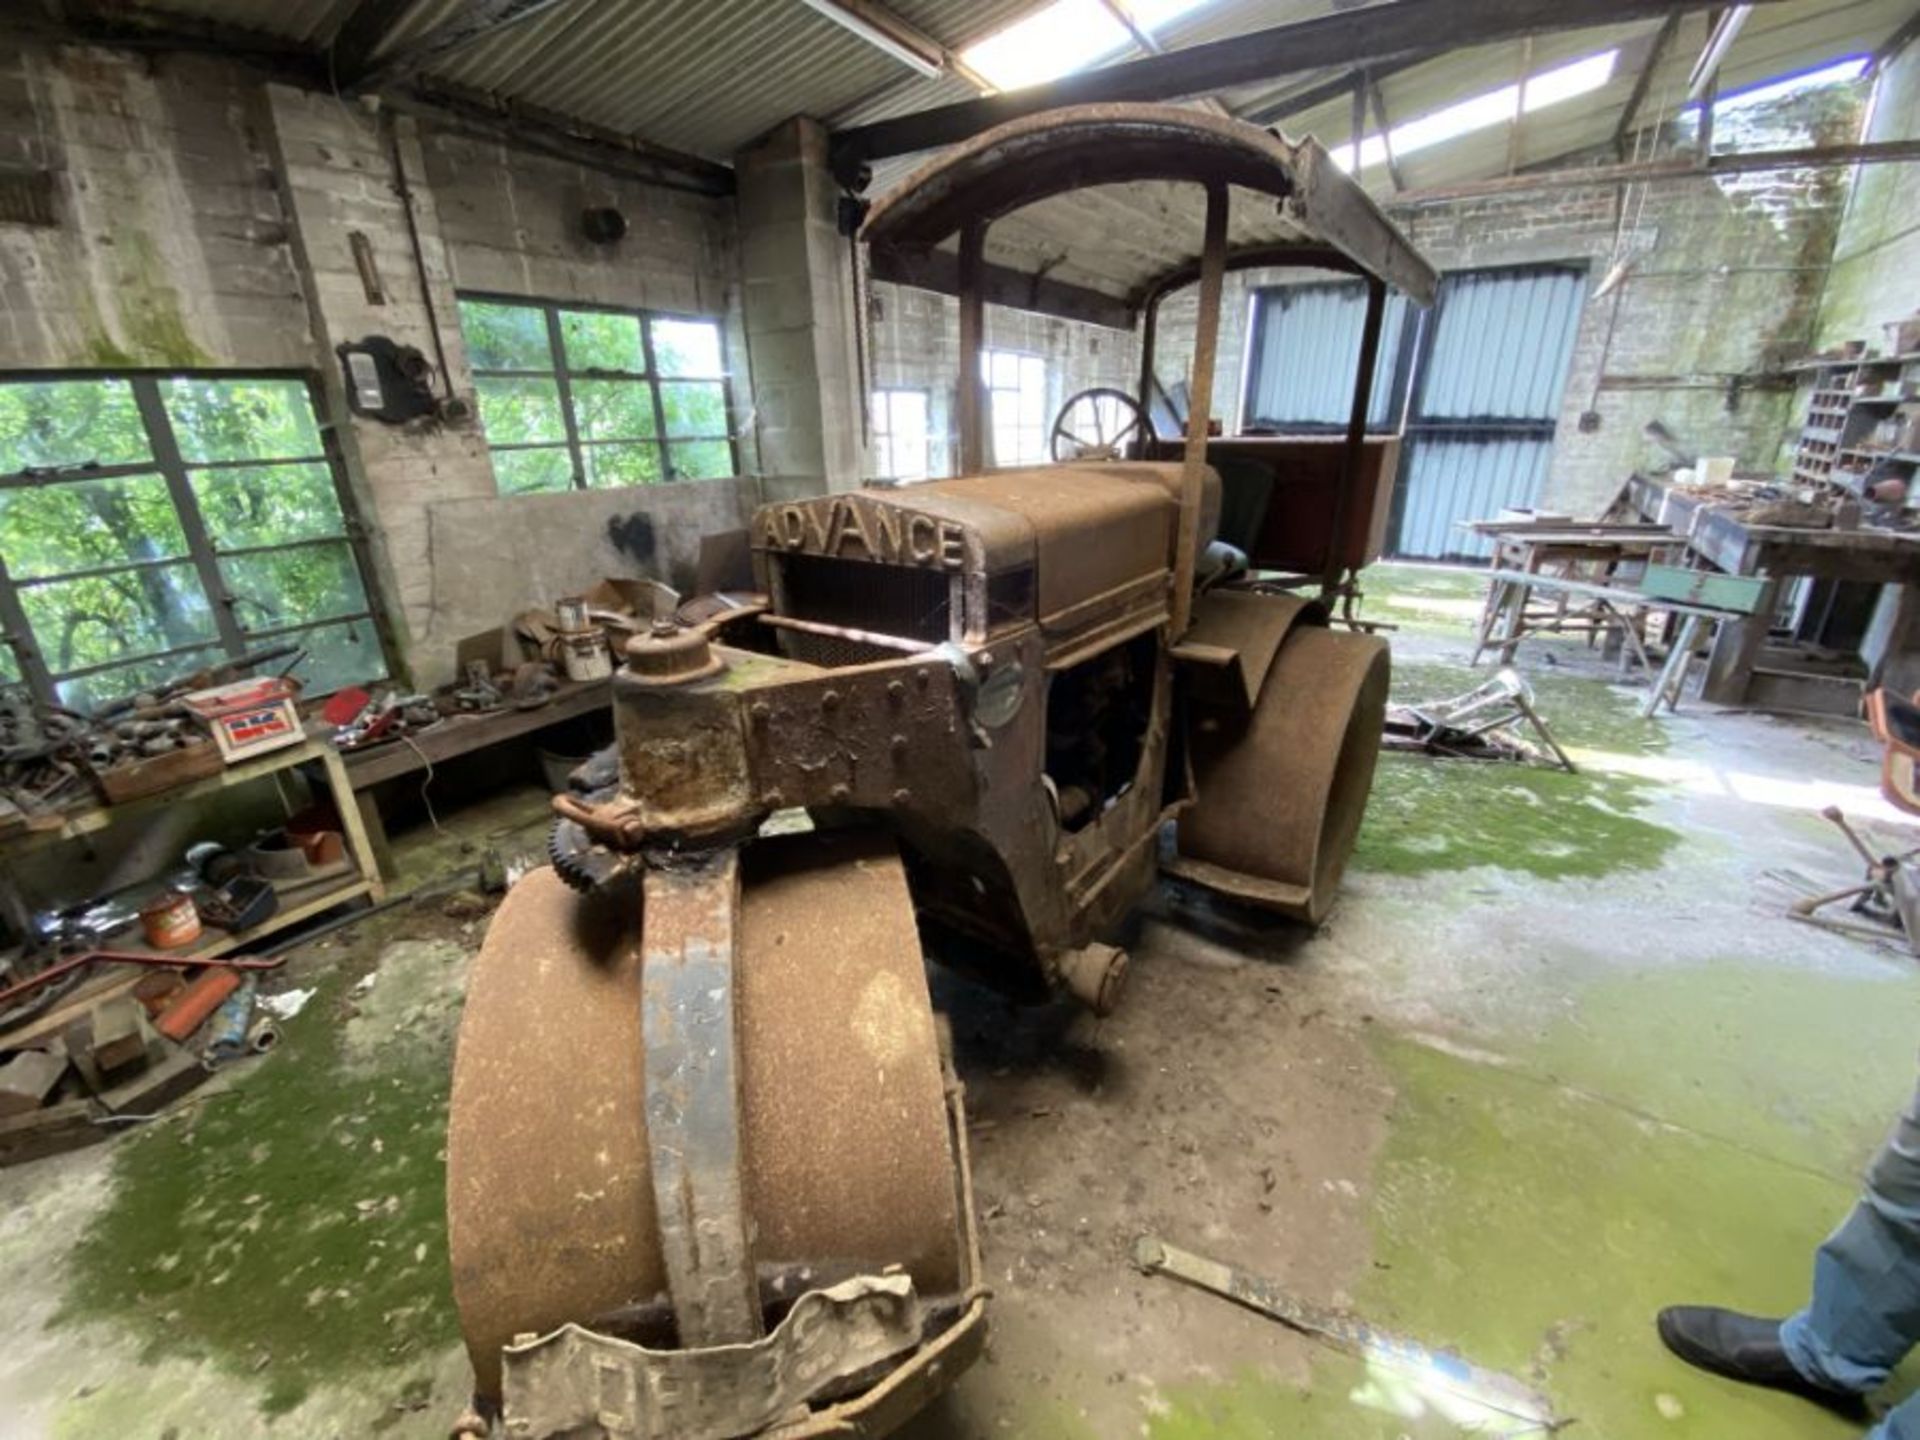 Wallis and Steevens Advance road roller - a true barn find! Has been stored in an old workshop - Image 2 of 3